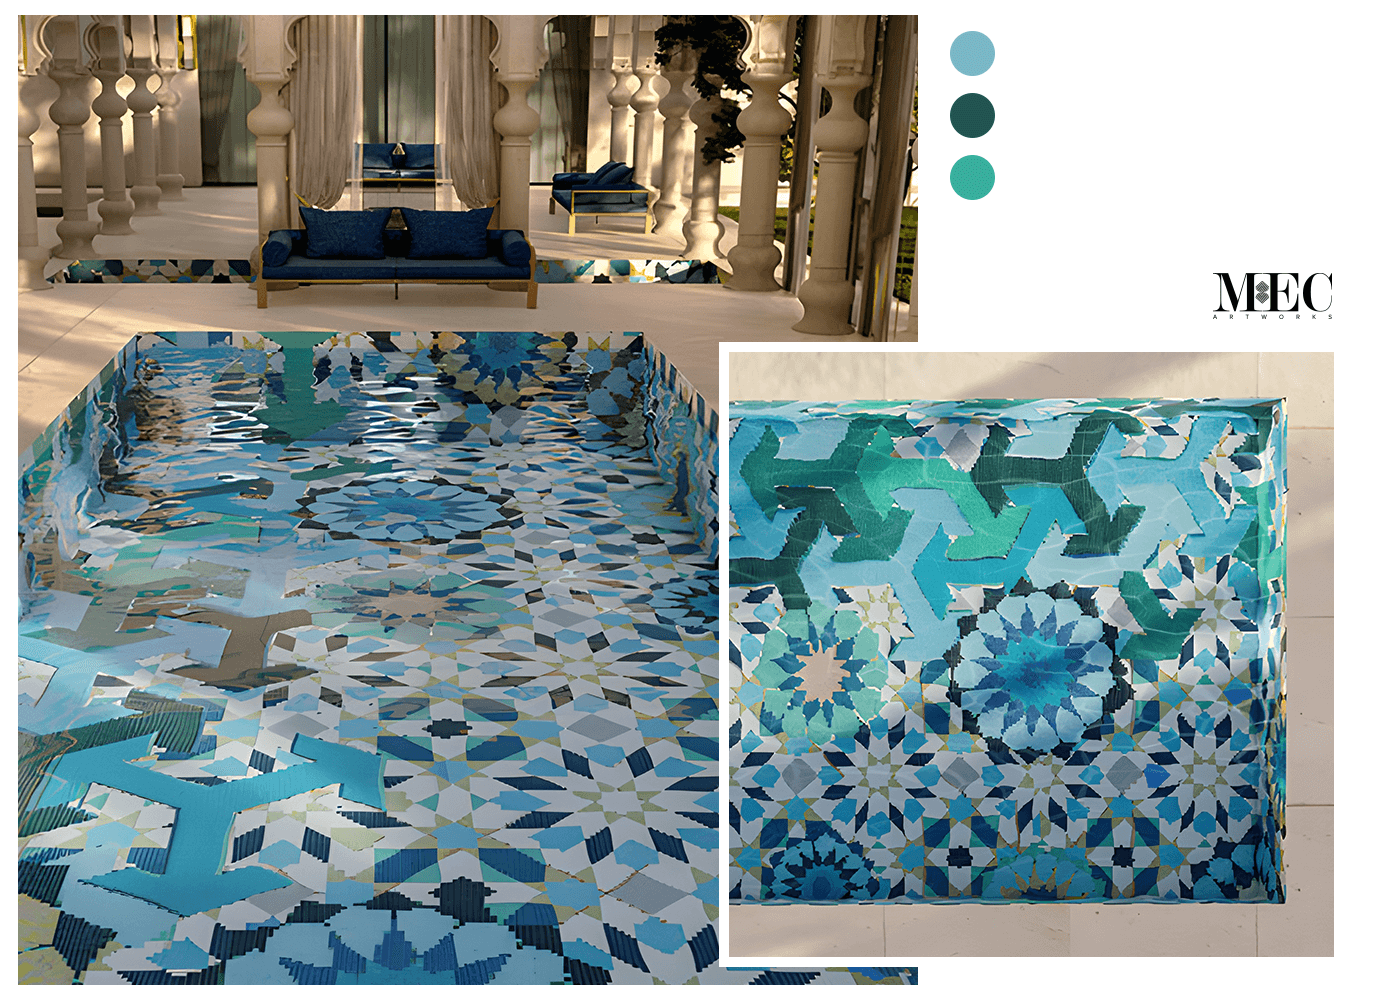 an abstract Vertex glass pool mosaic based on Moroccan Zellige tile patterns.